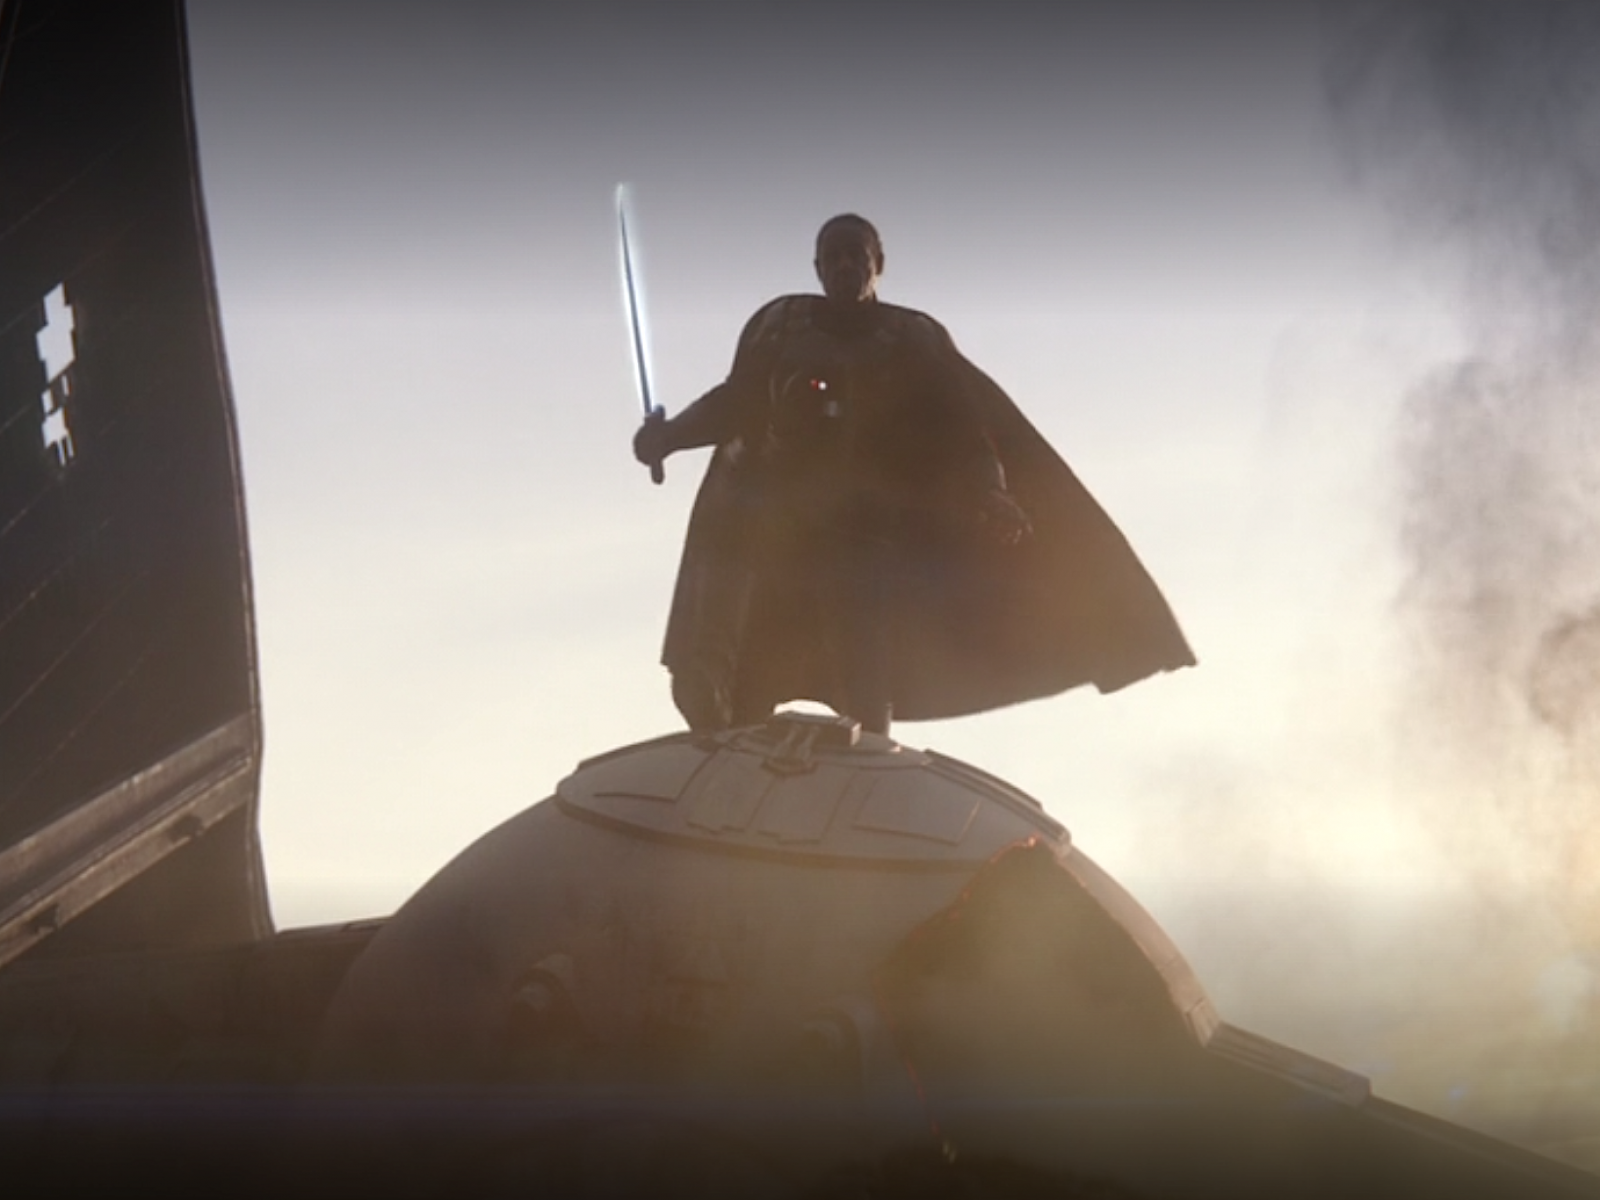 The Mandalorian' Season 2 Features Darksaber Battle And Baby Yoda Is Intrigued